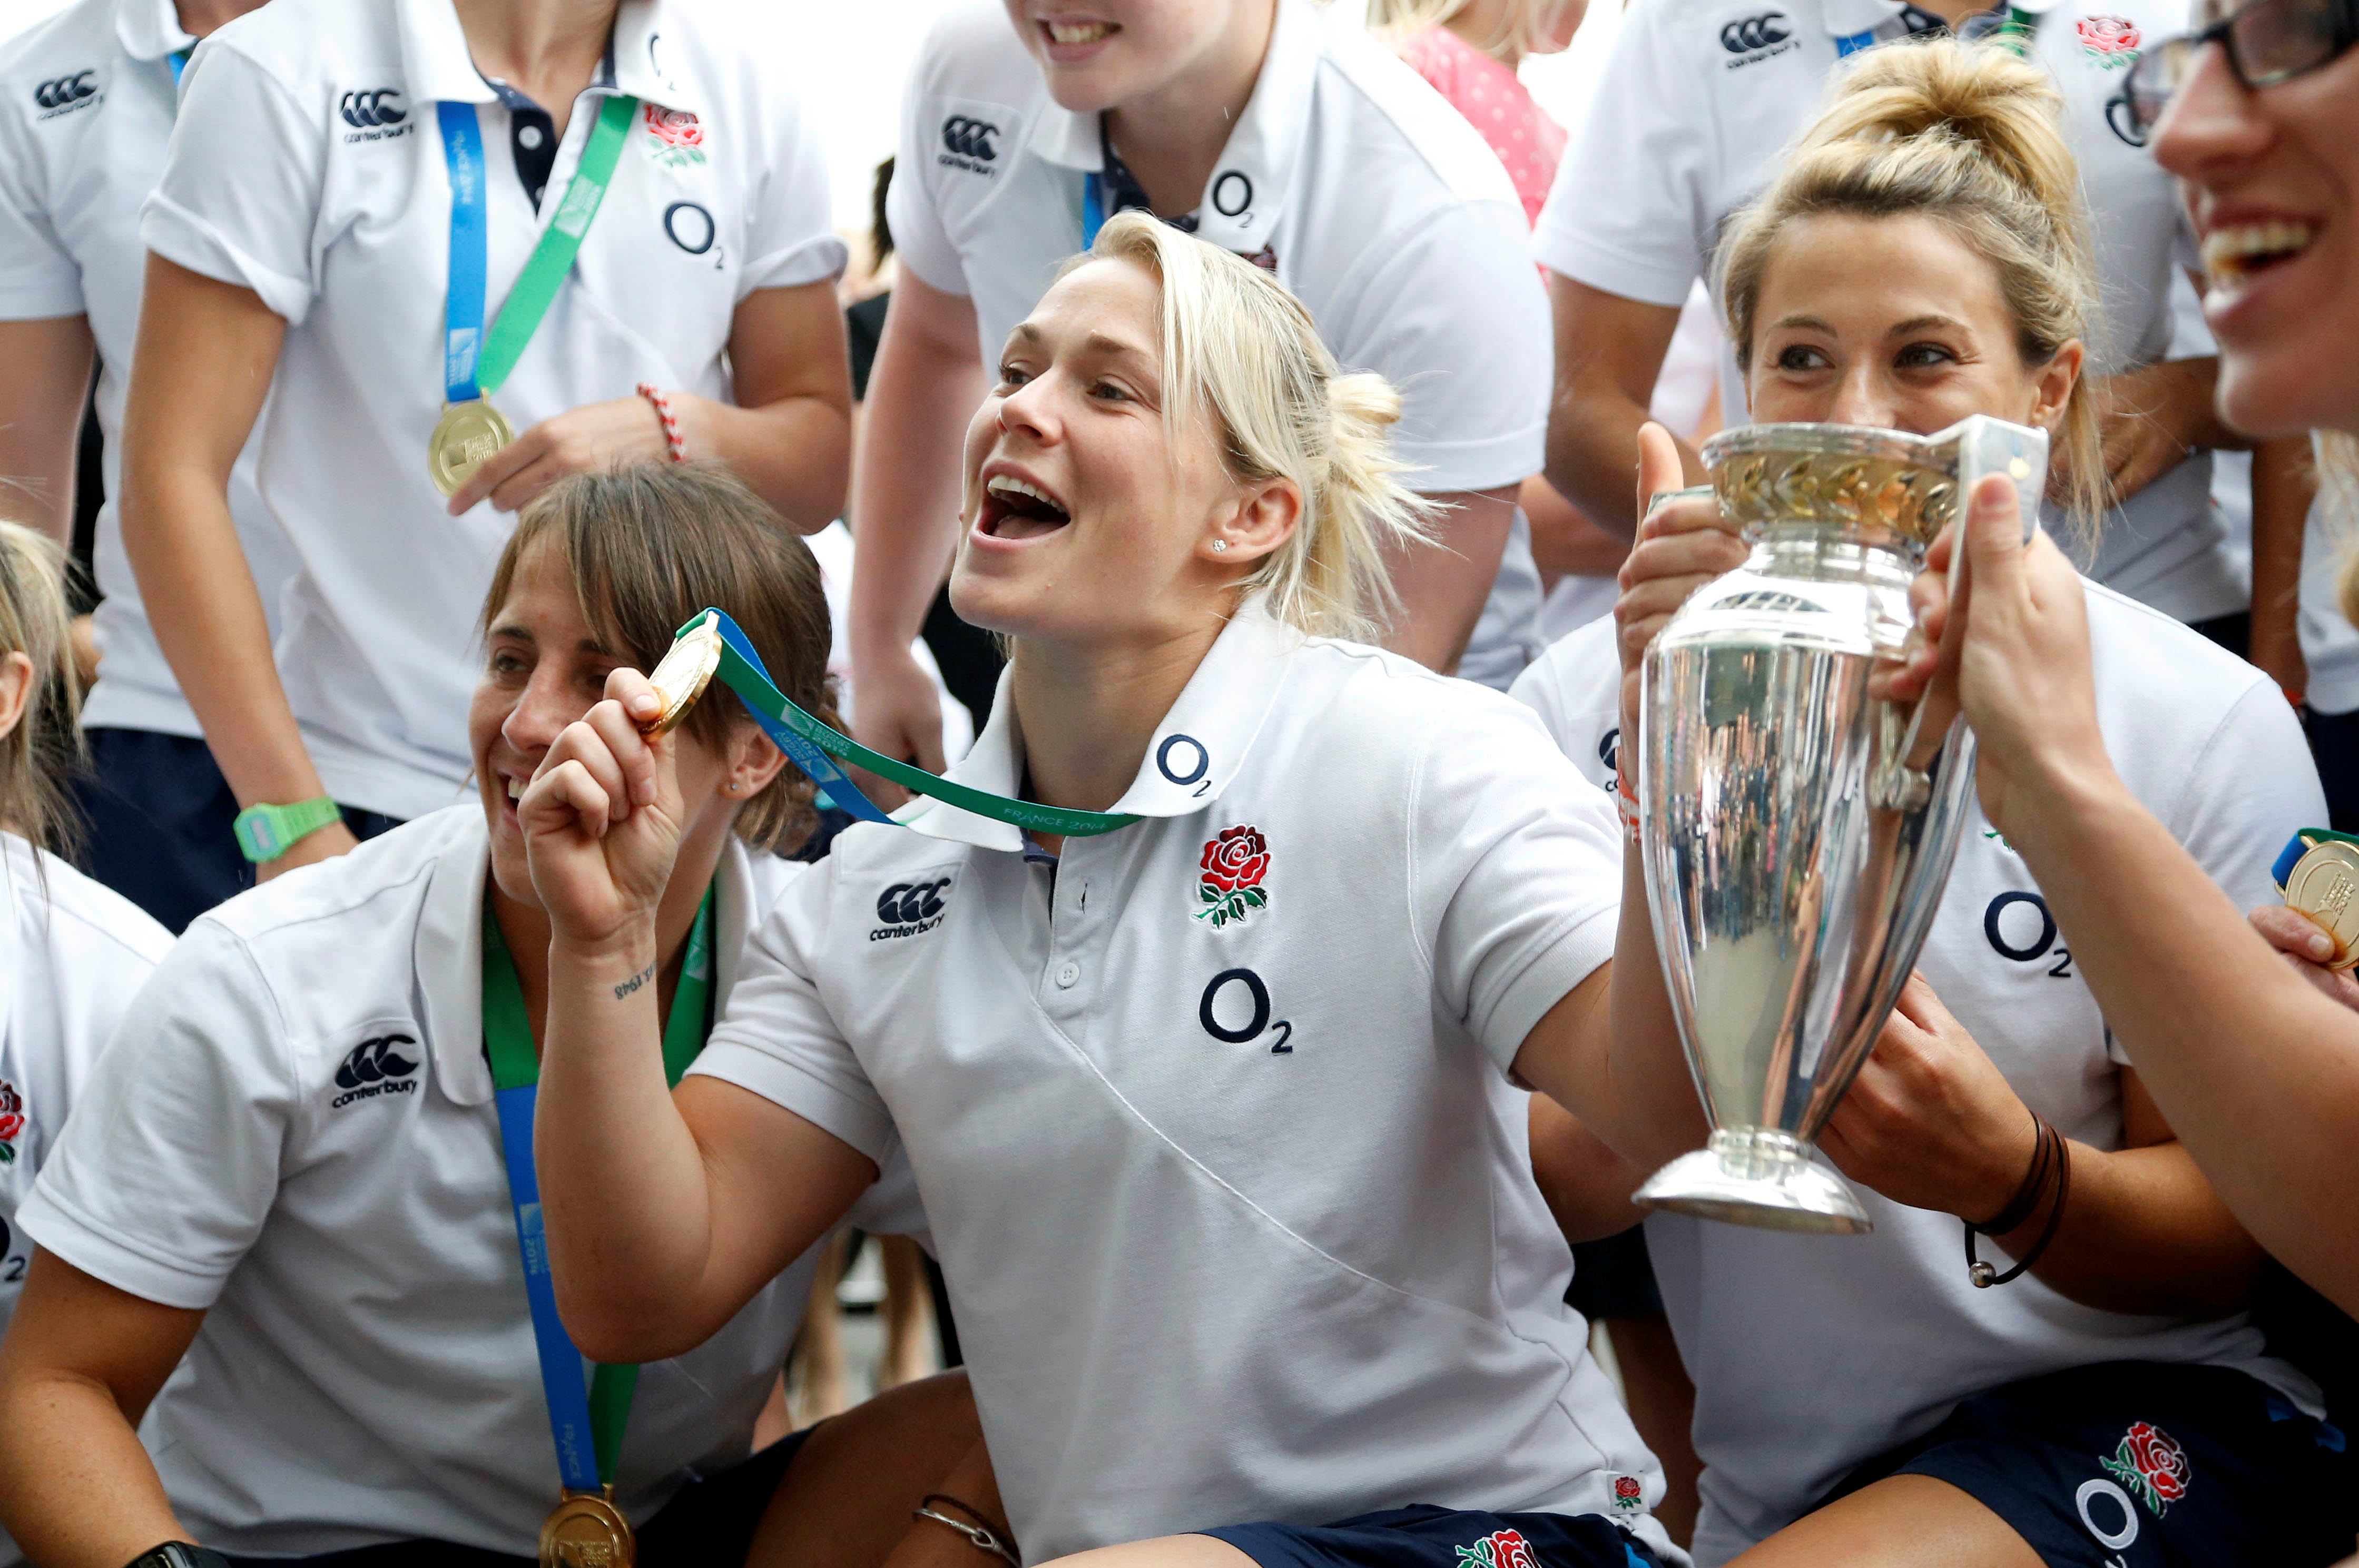 England’s Rugby Football Union throws hat into the ring to host 2025 Women’s World Cup